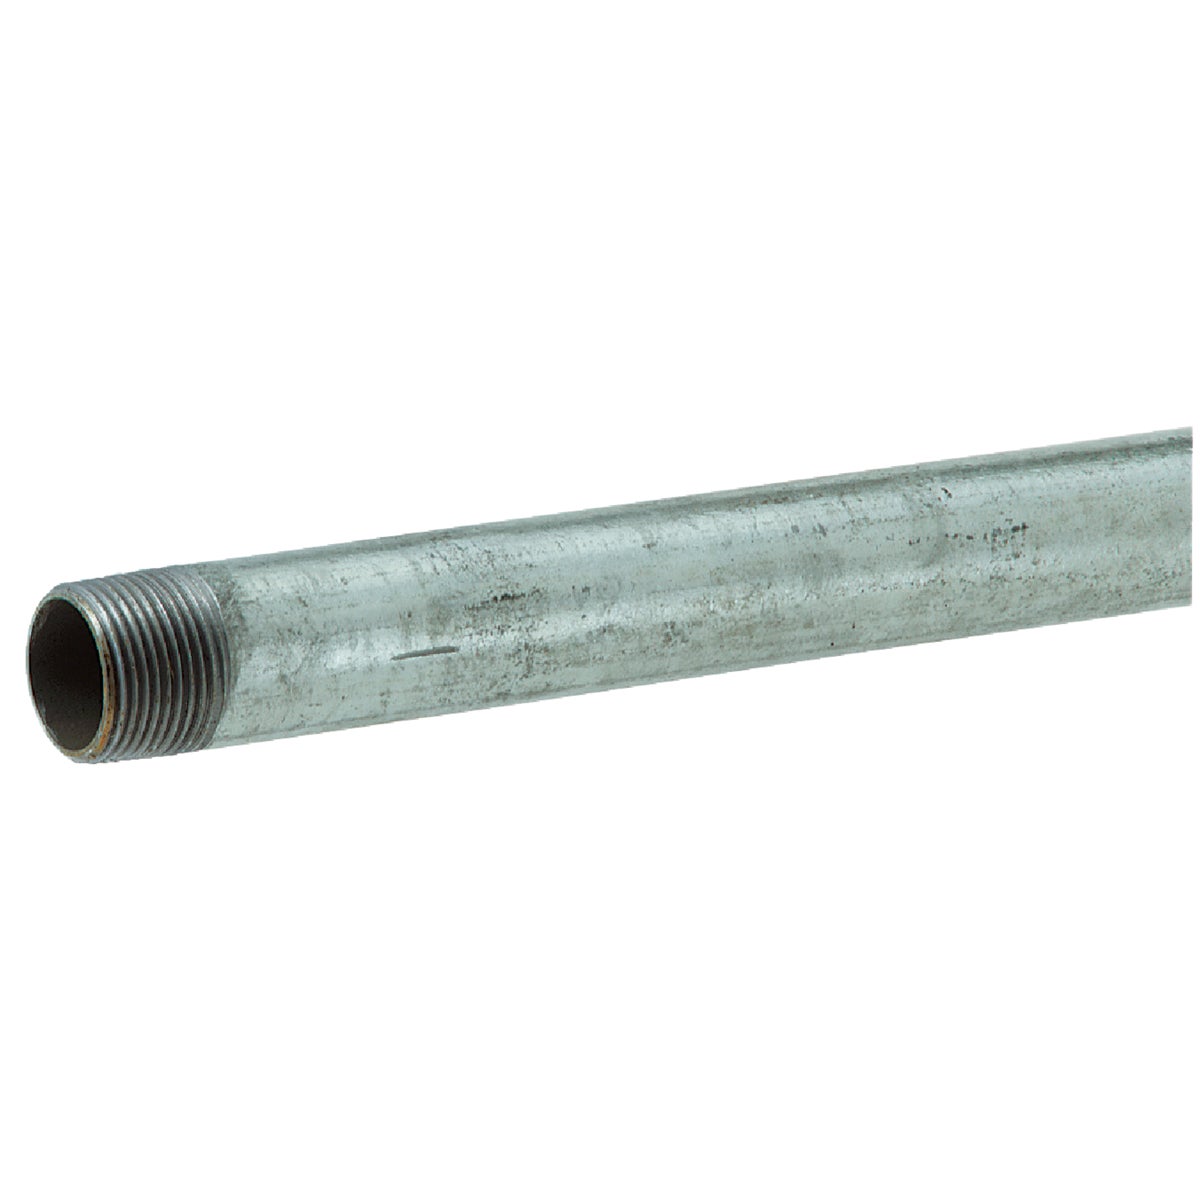 Southland 3/4 In. x 36 In. Carbon Steel Threaded Galvanized Pipe